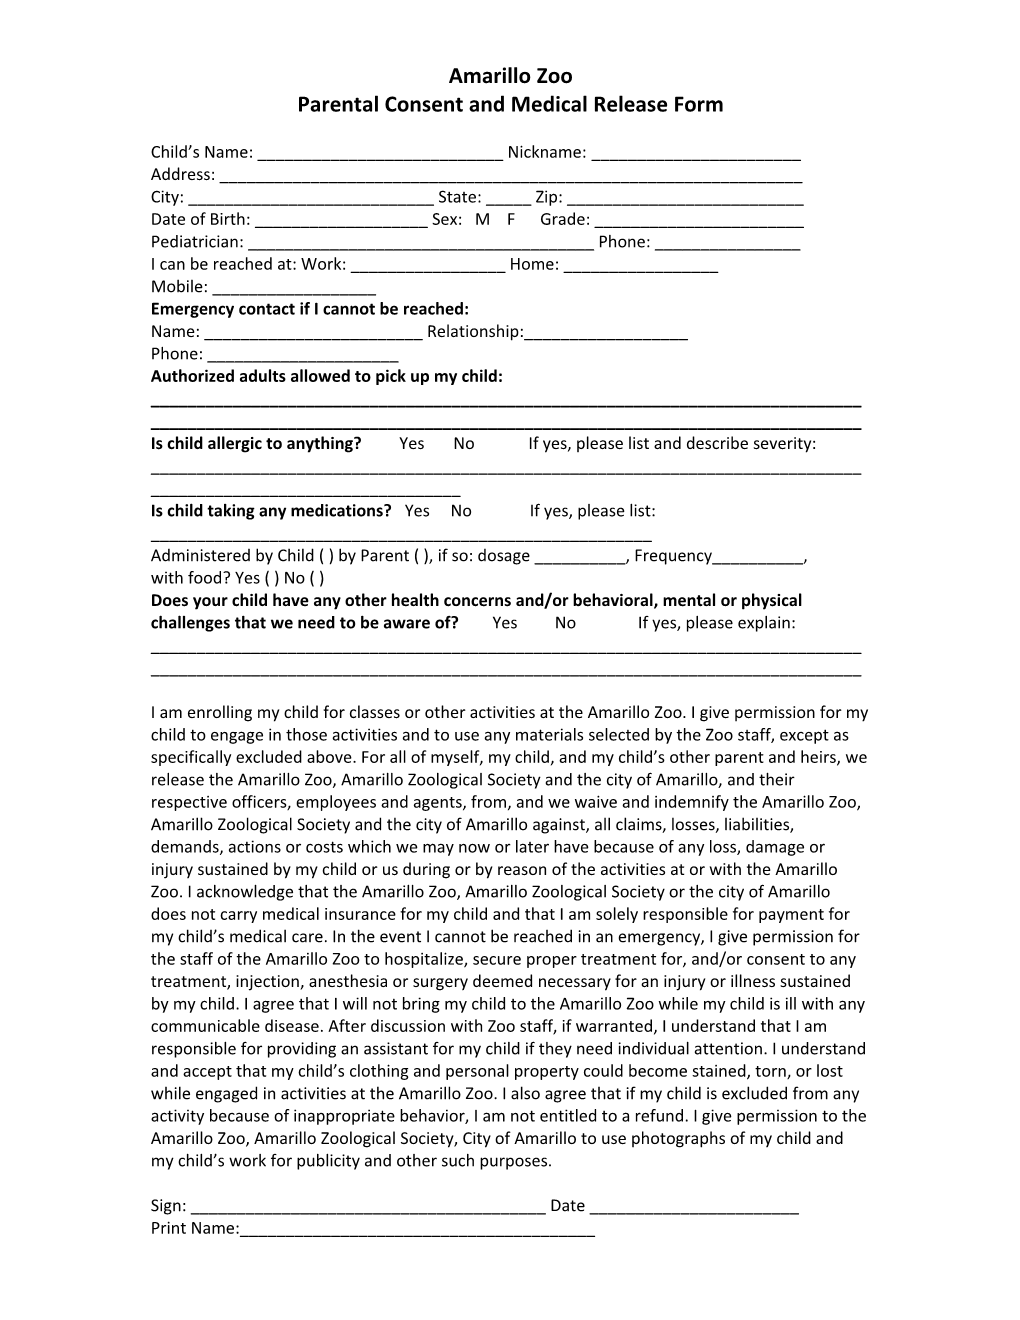 Parental Consent and Medical Release Form